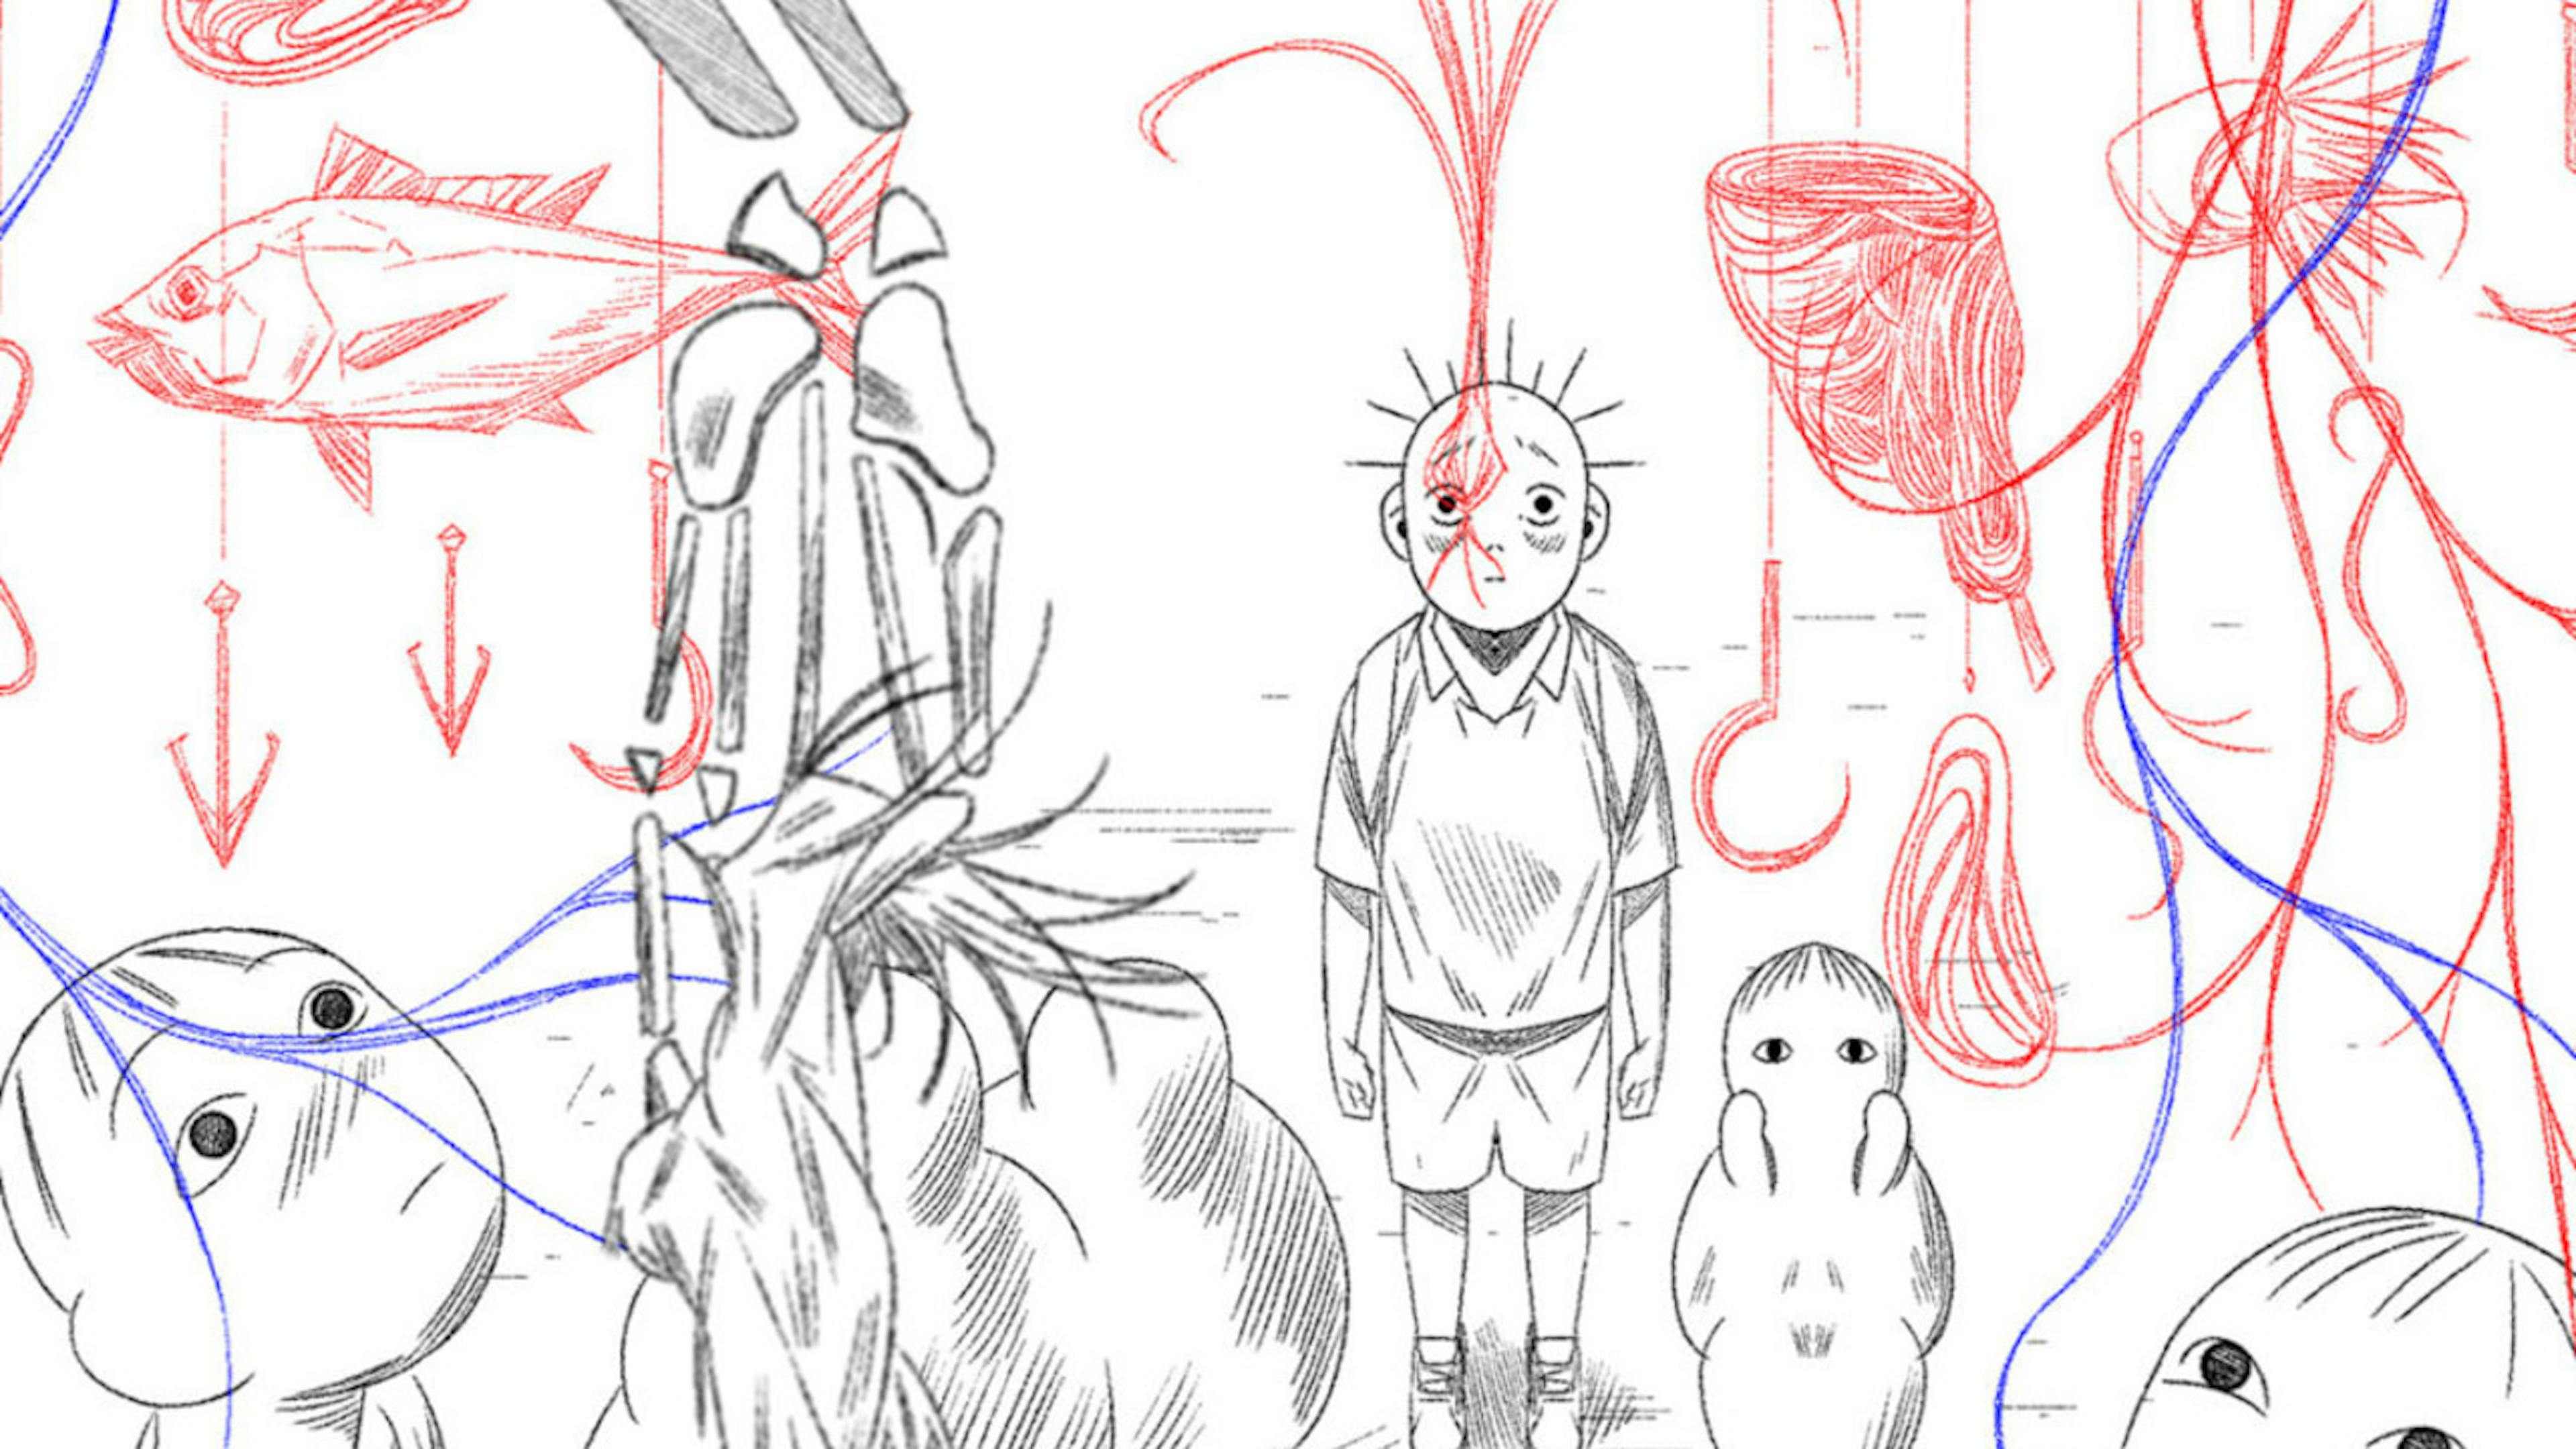 A line drawing of a child looking worried, staring straight forward, as other children look up. Other images are overlaid in red pencil, of fish hooks, a fish, a cut of meat, and what look like dead grassses.